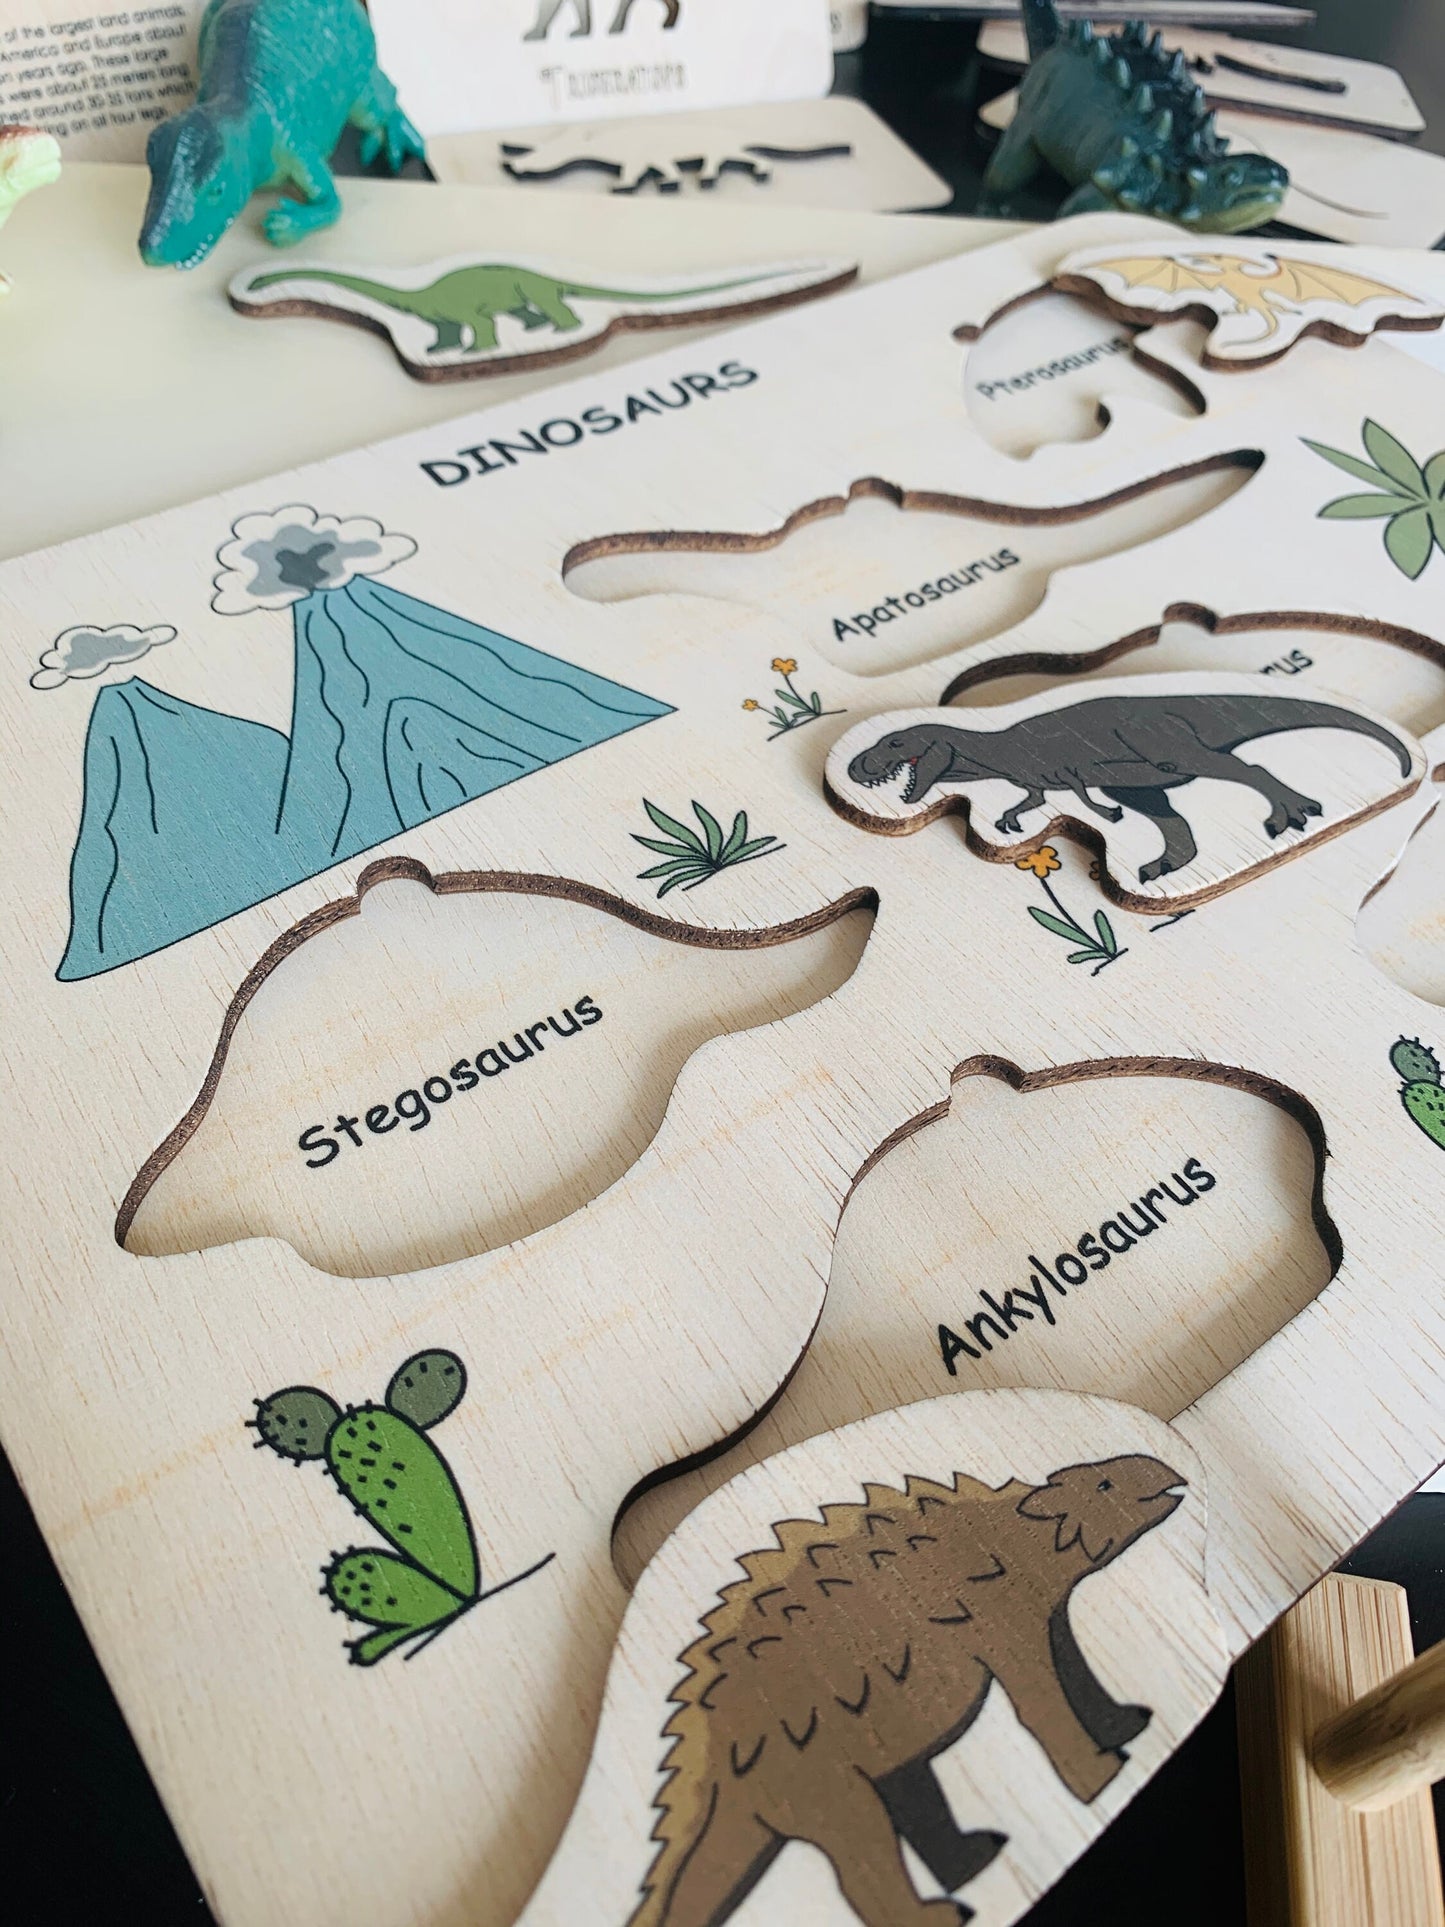 Wooden Dinosaur Puzzle, Dino Puzzle, Learning Dinosaur Types, Educational Toy